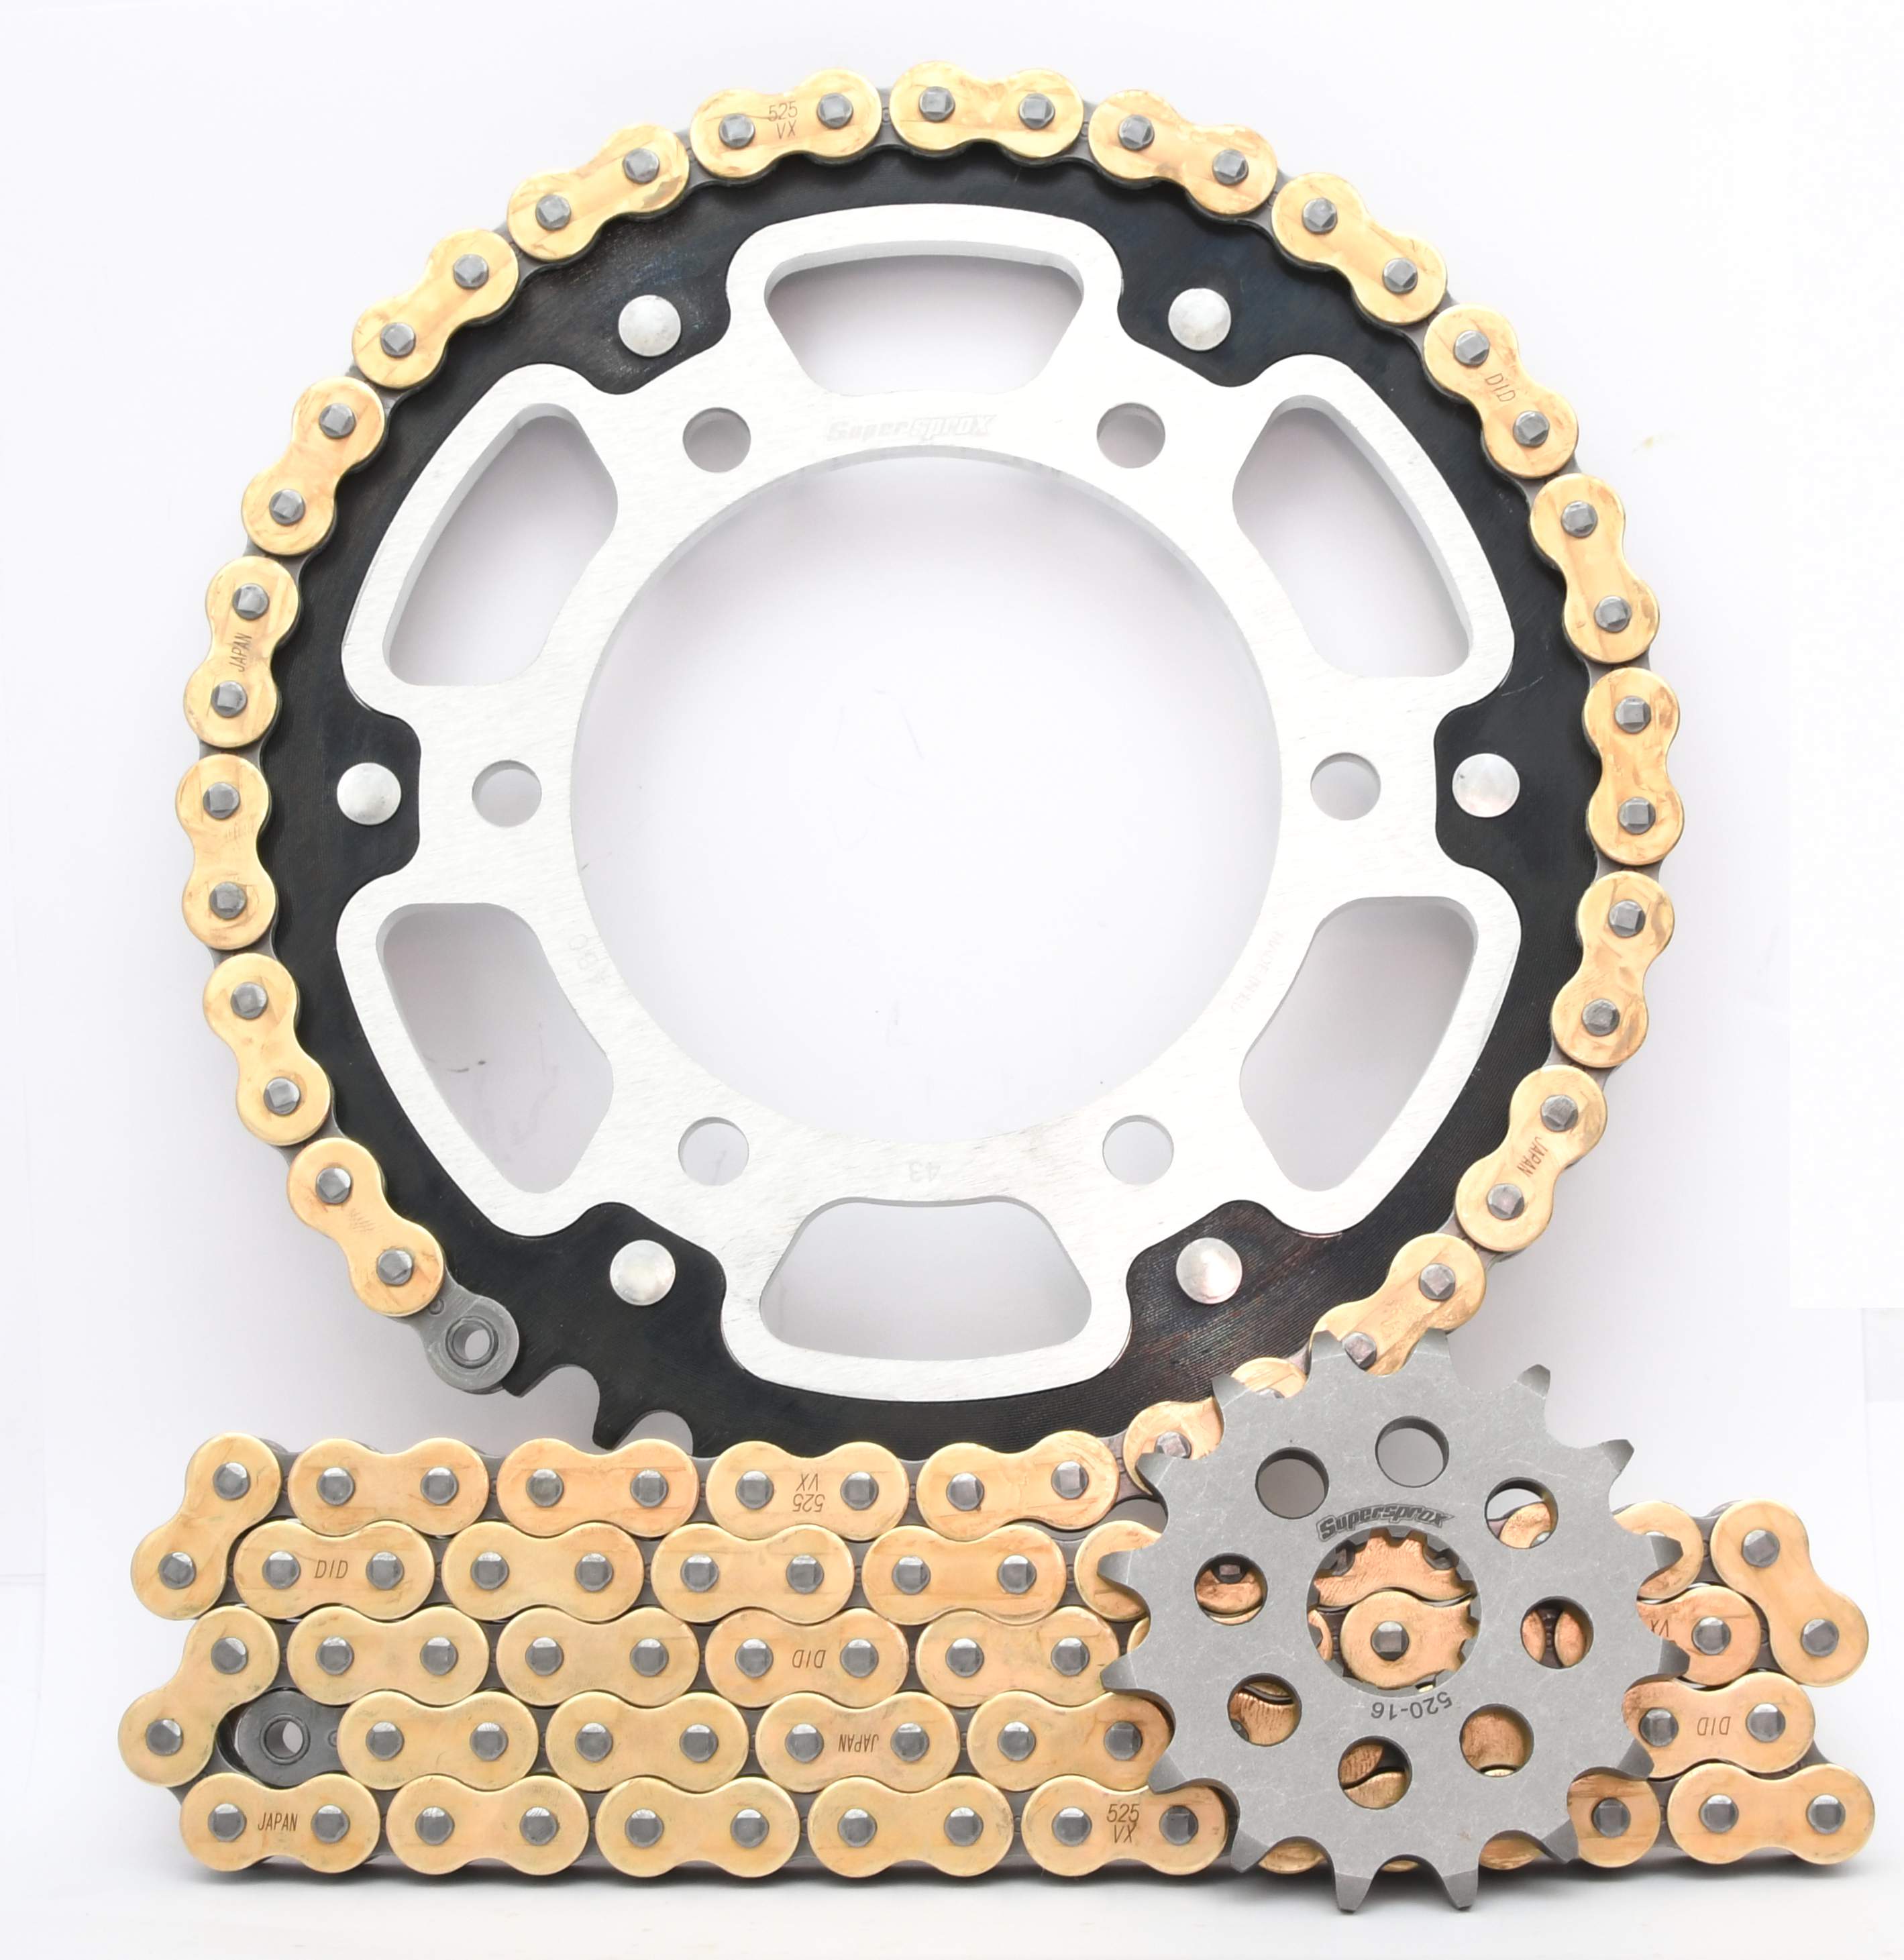 Supersprox Chain & Sprocket Kit for GSX-R 600/750 L1-L8 - Choose Your Gearing